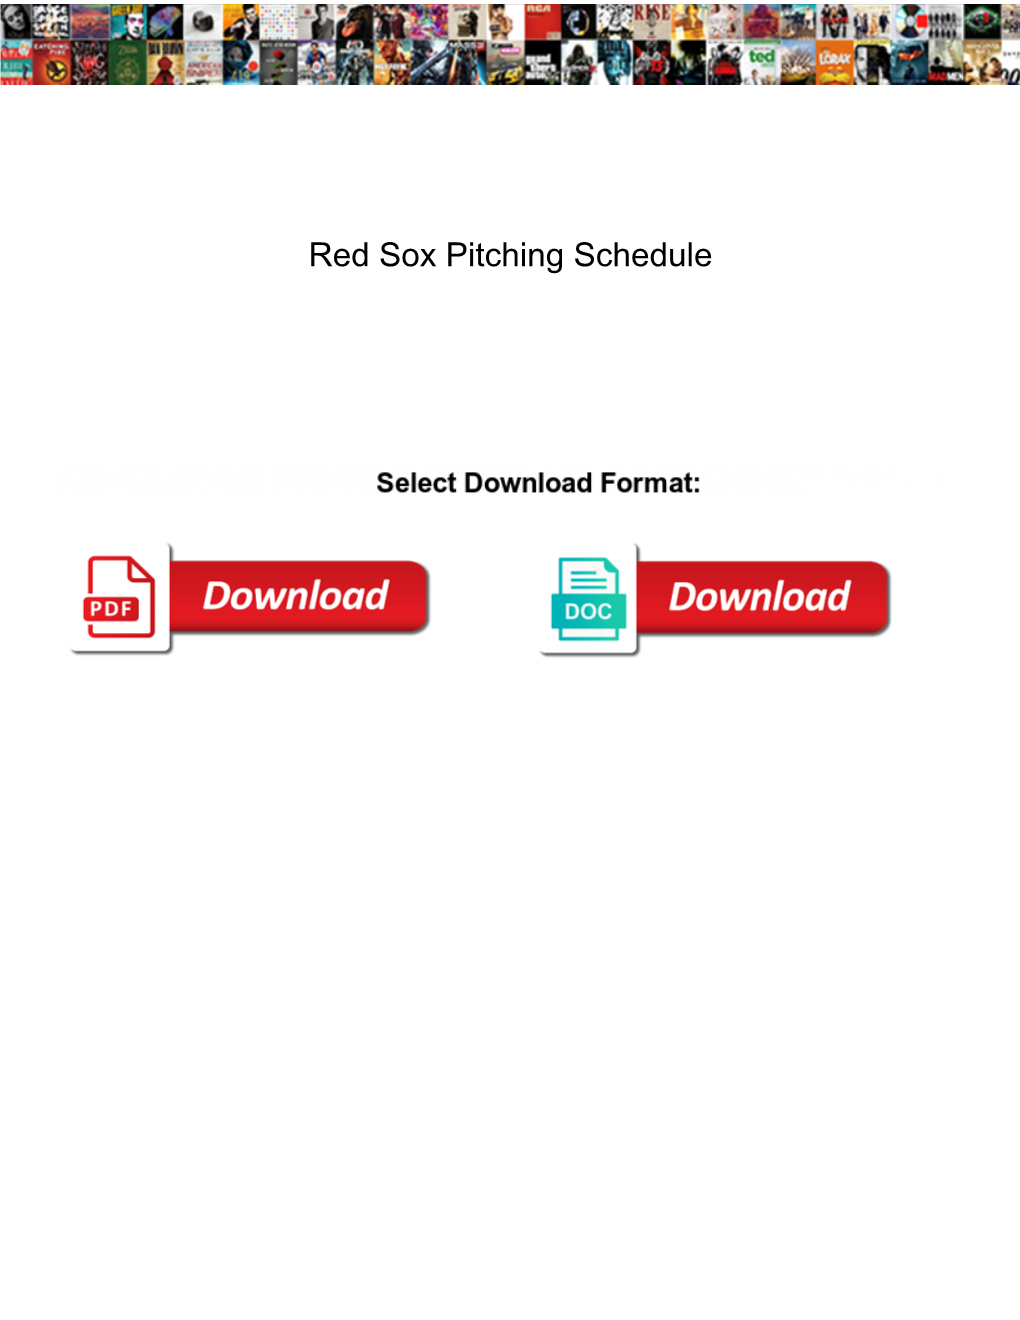 Red Sox Pitching Schedule